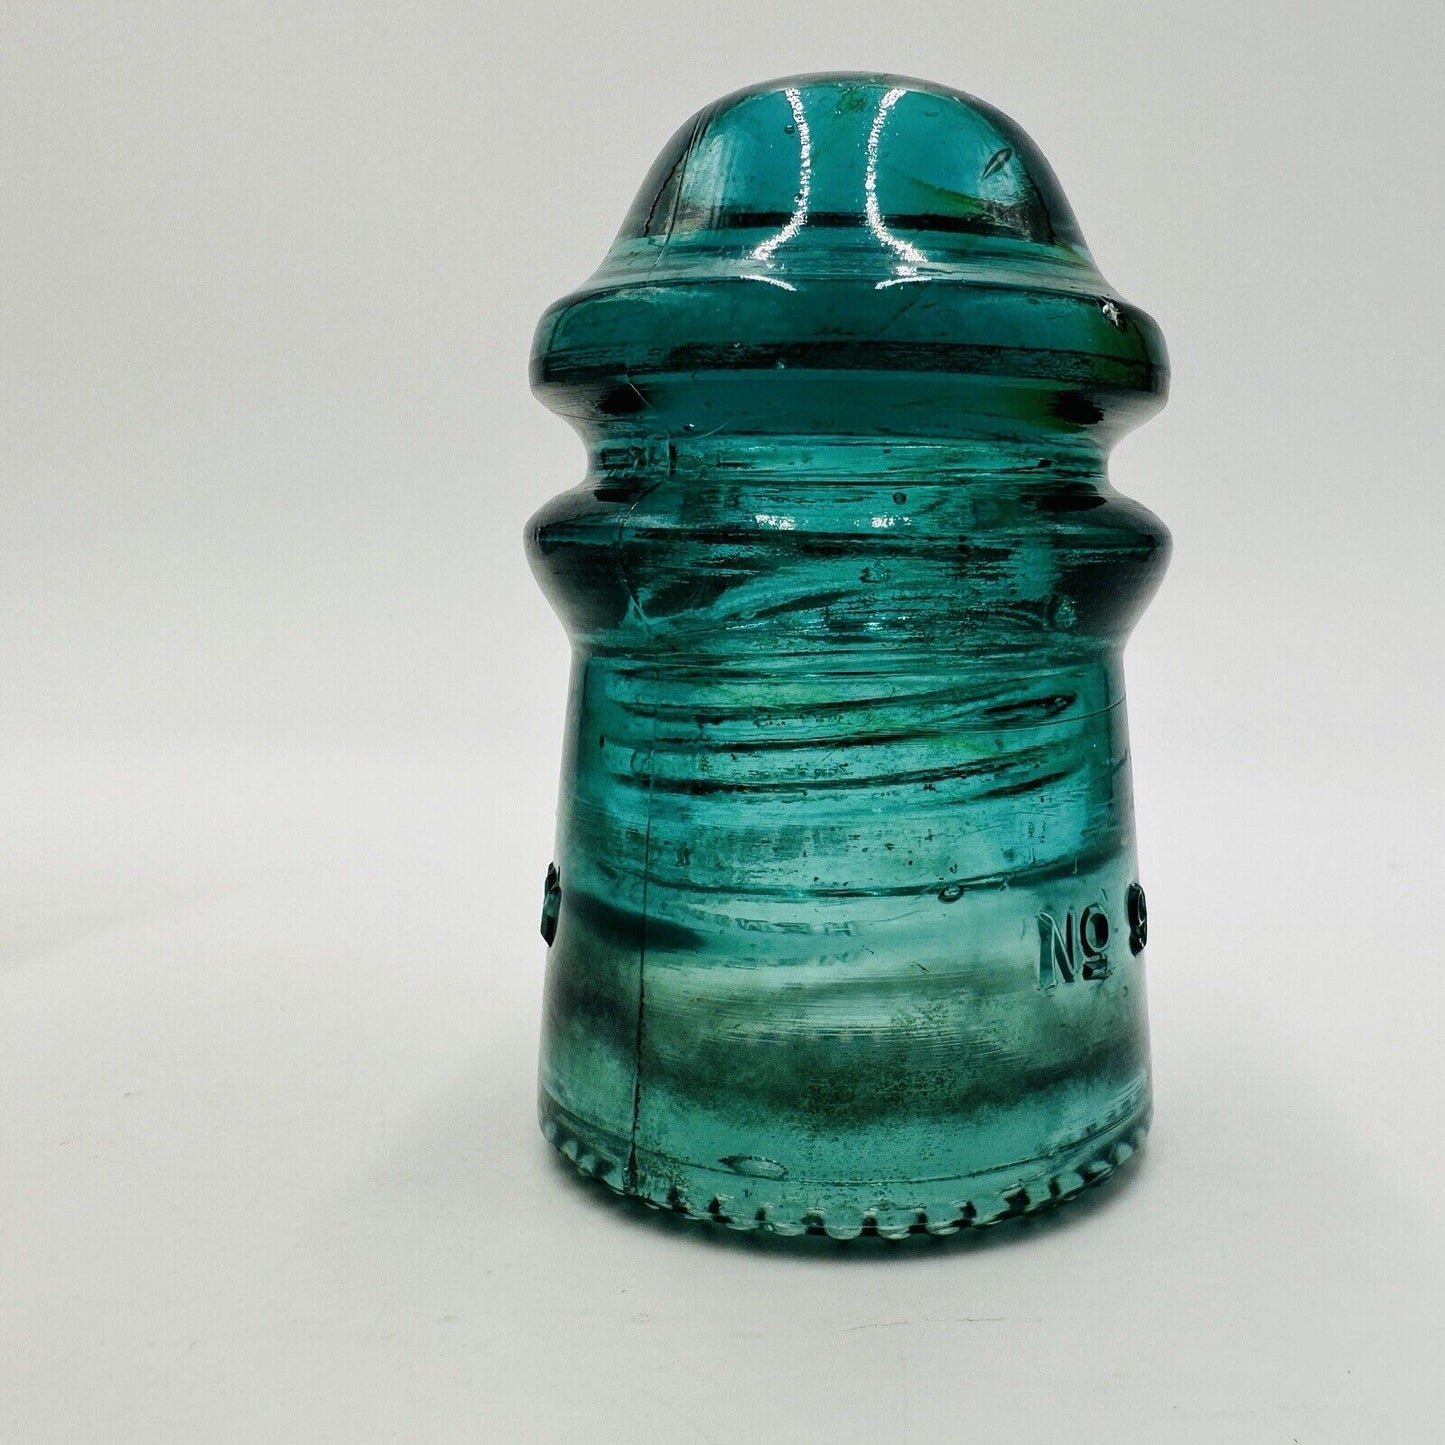 Hemingray  NO 9 glass  Insulator  turquoise EARLY 1893-1895  EMBOSSED antique